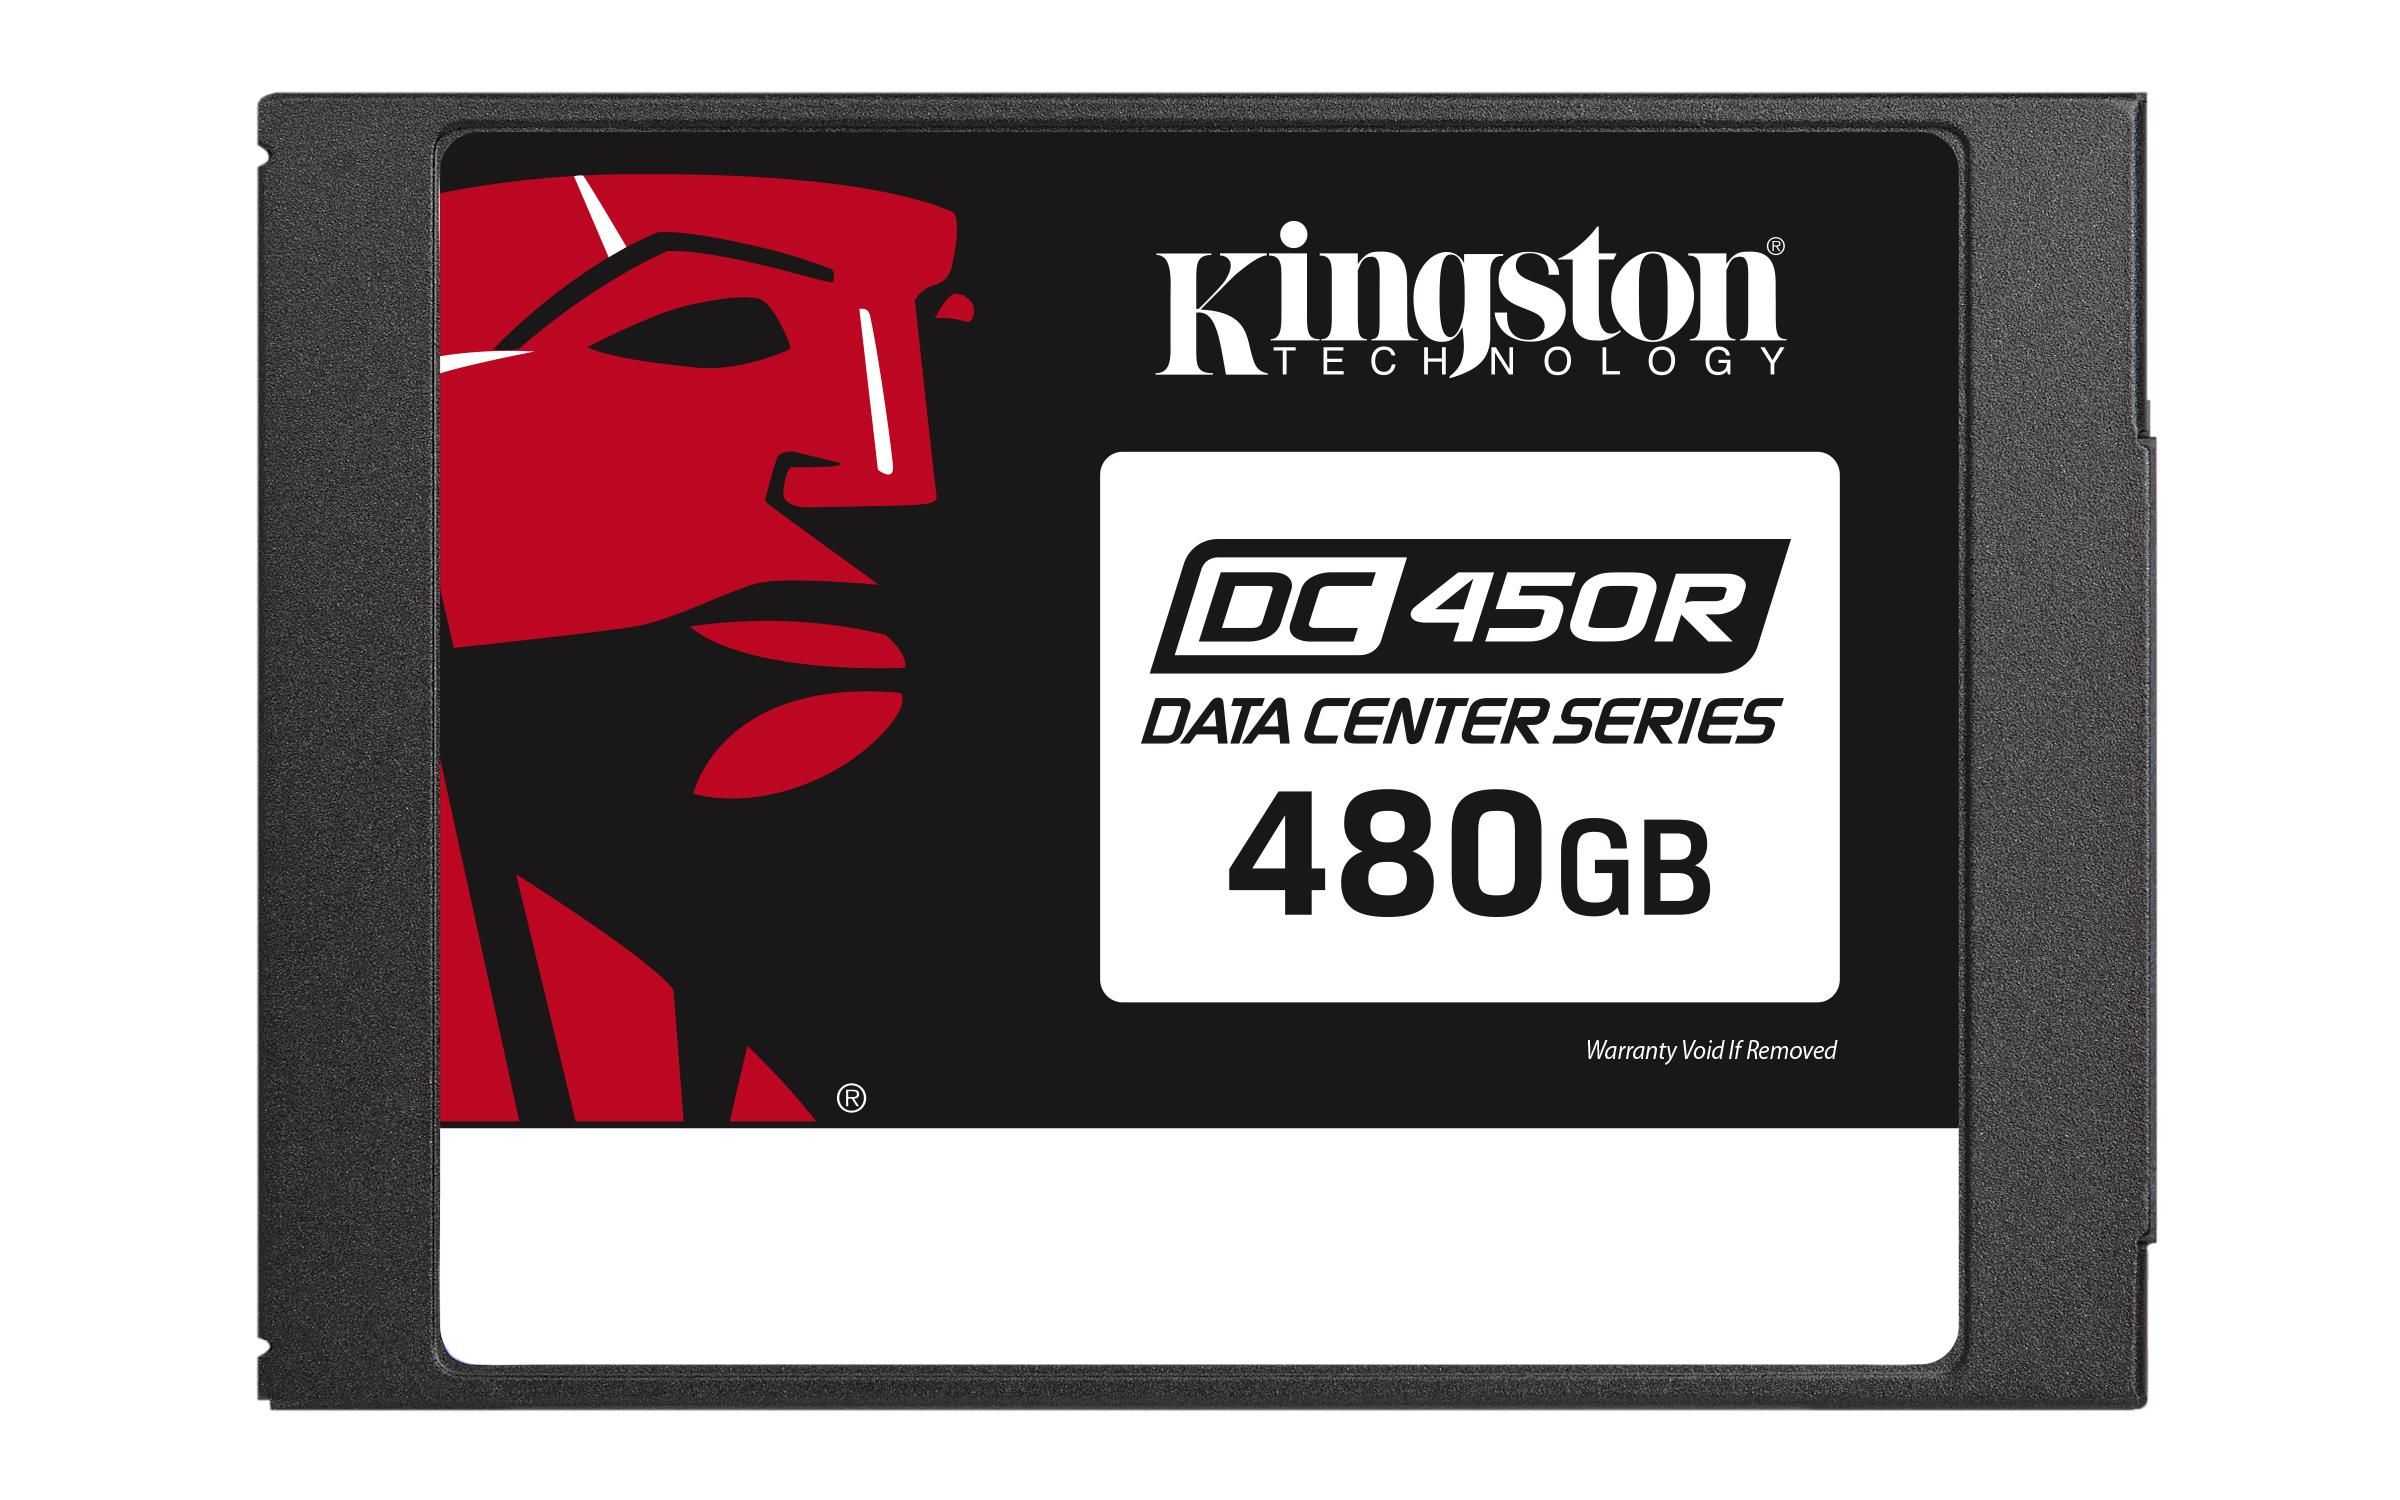 Kingston DC450R Solid State